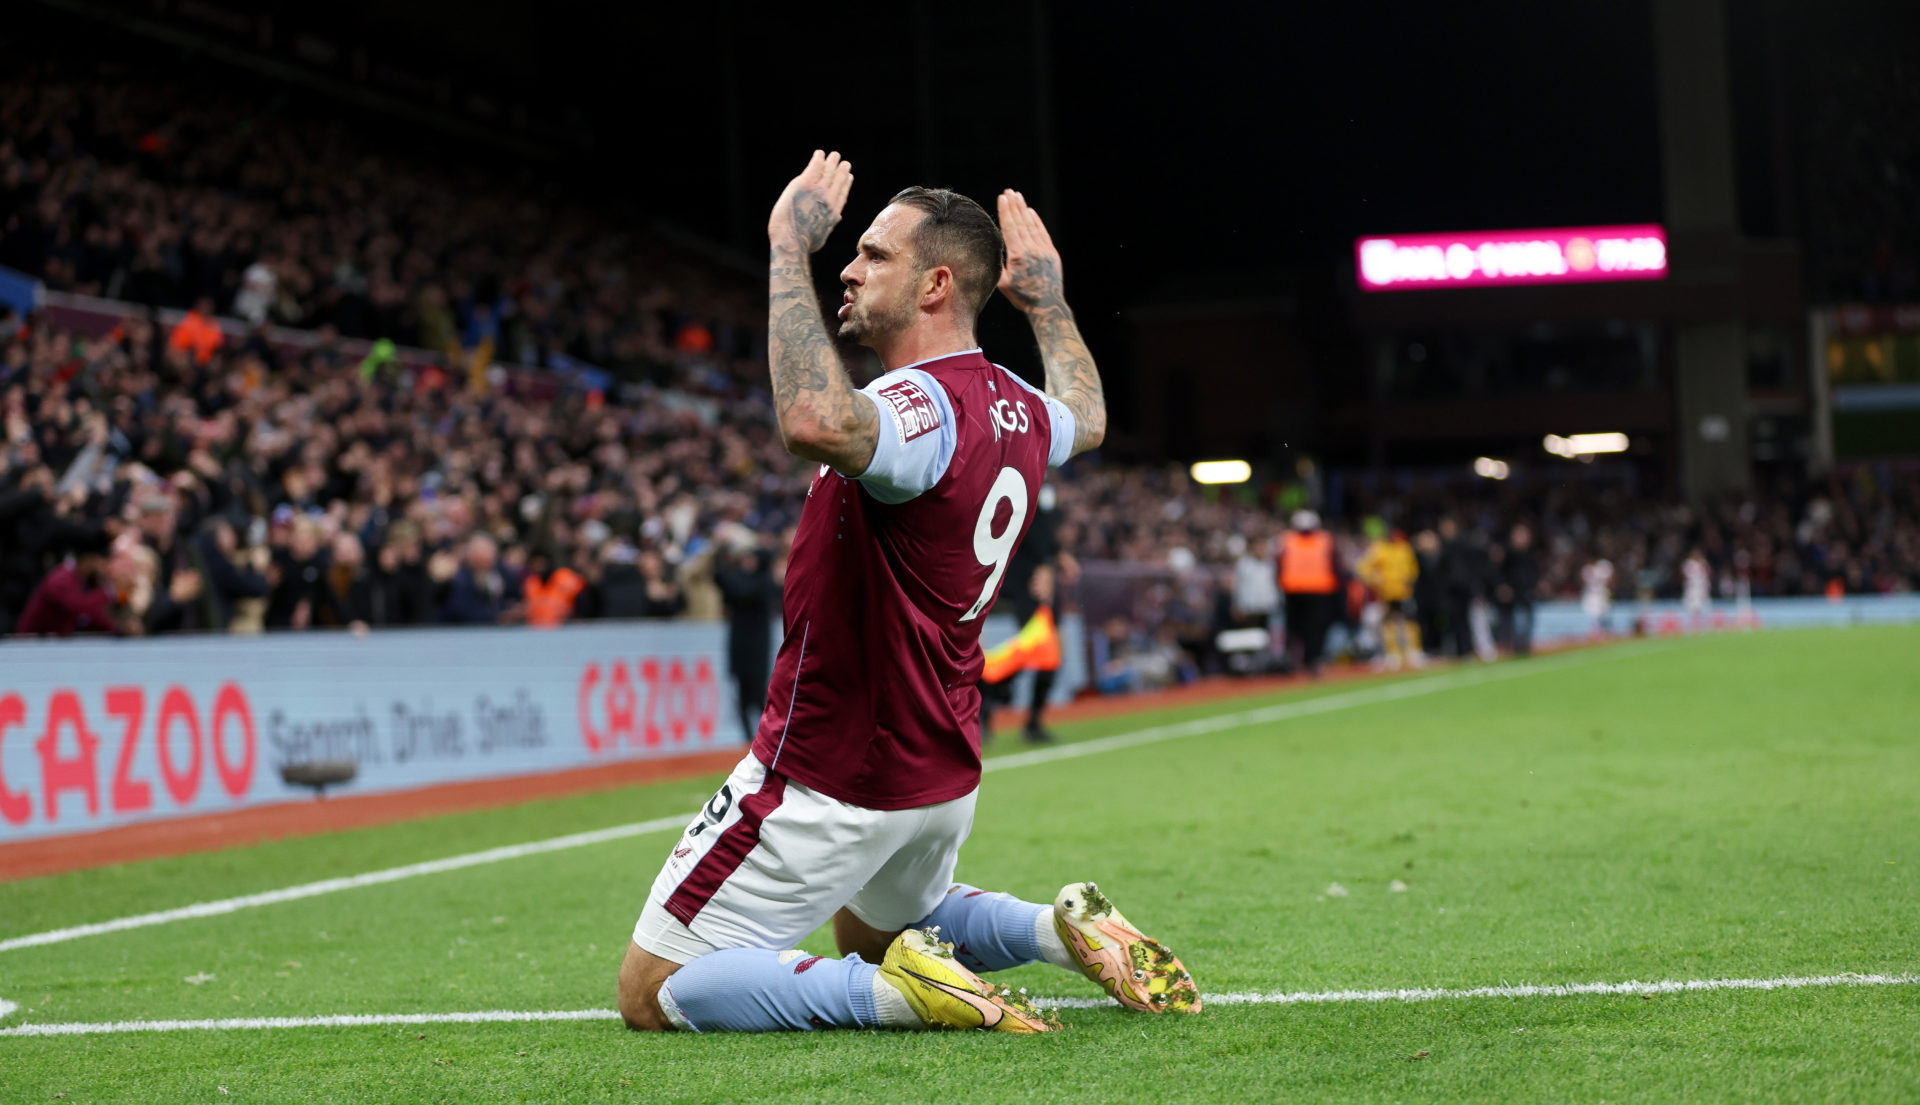 Can Danny Ings play against Everton?